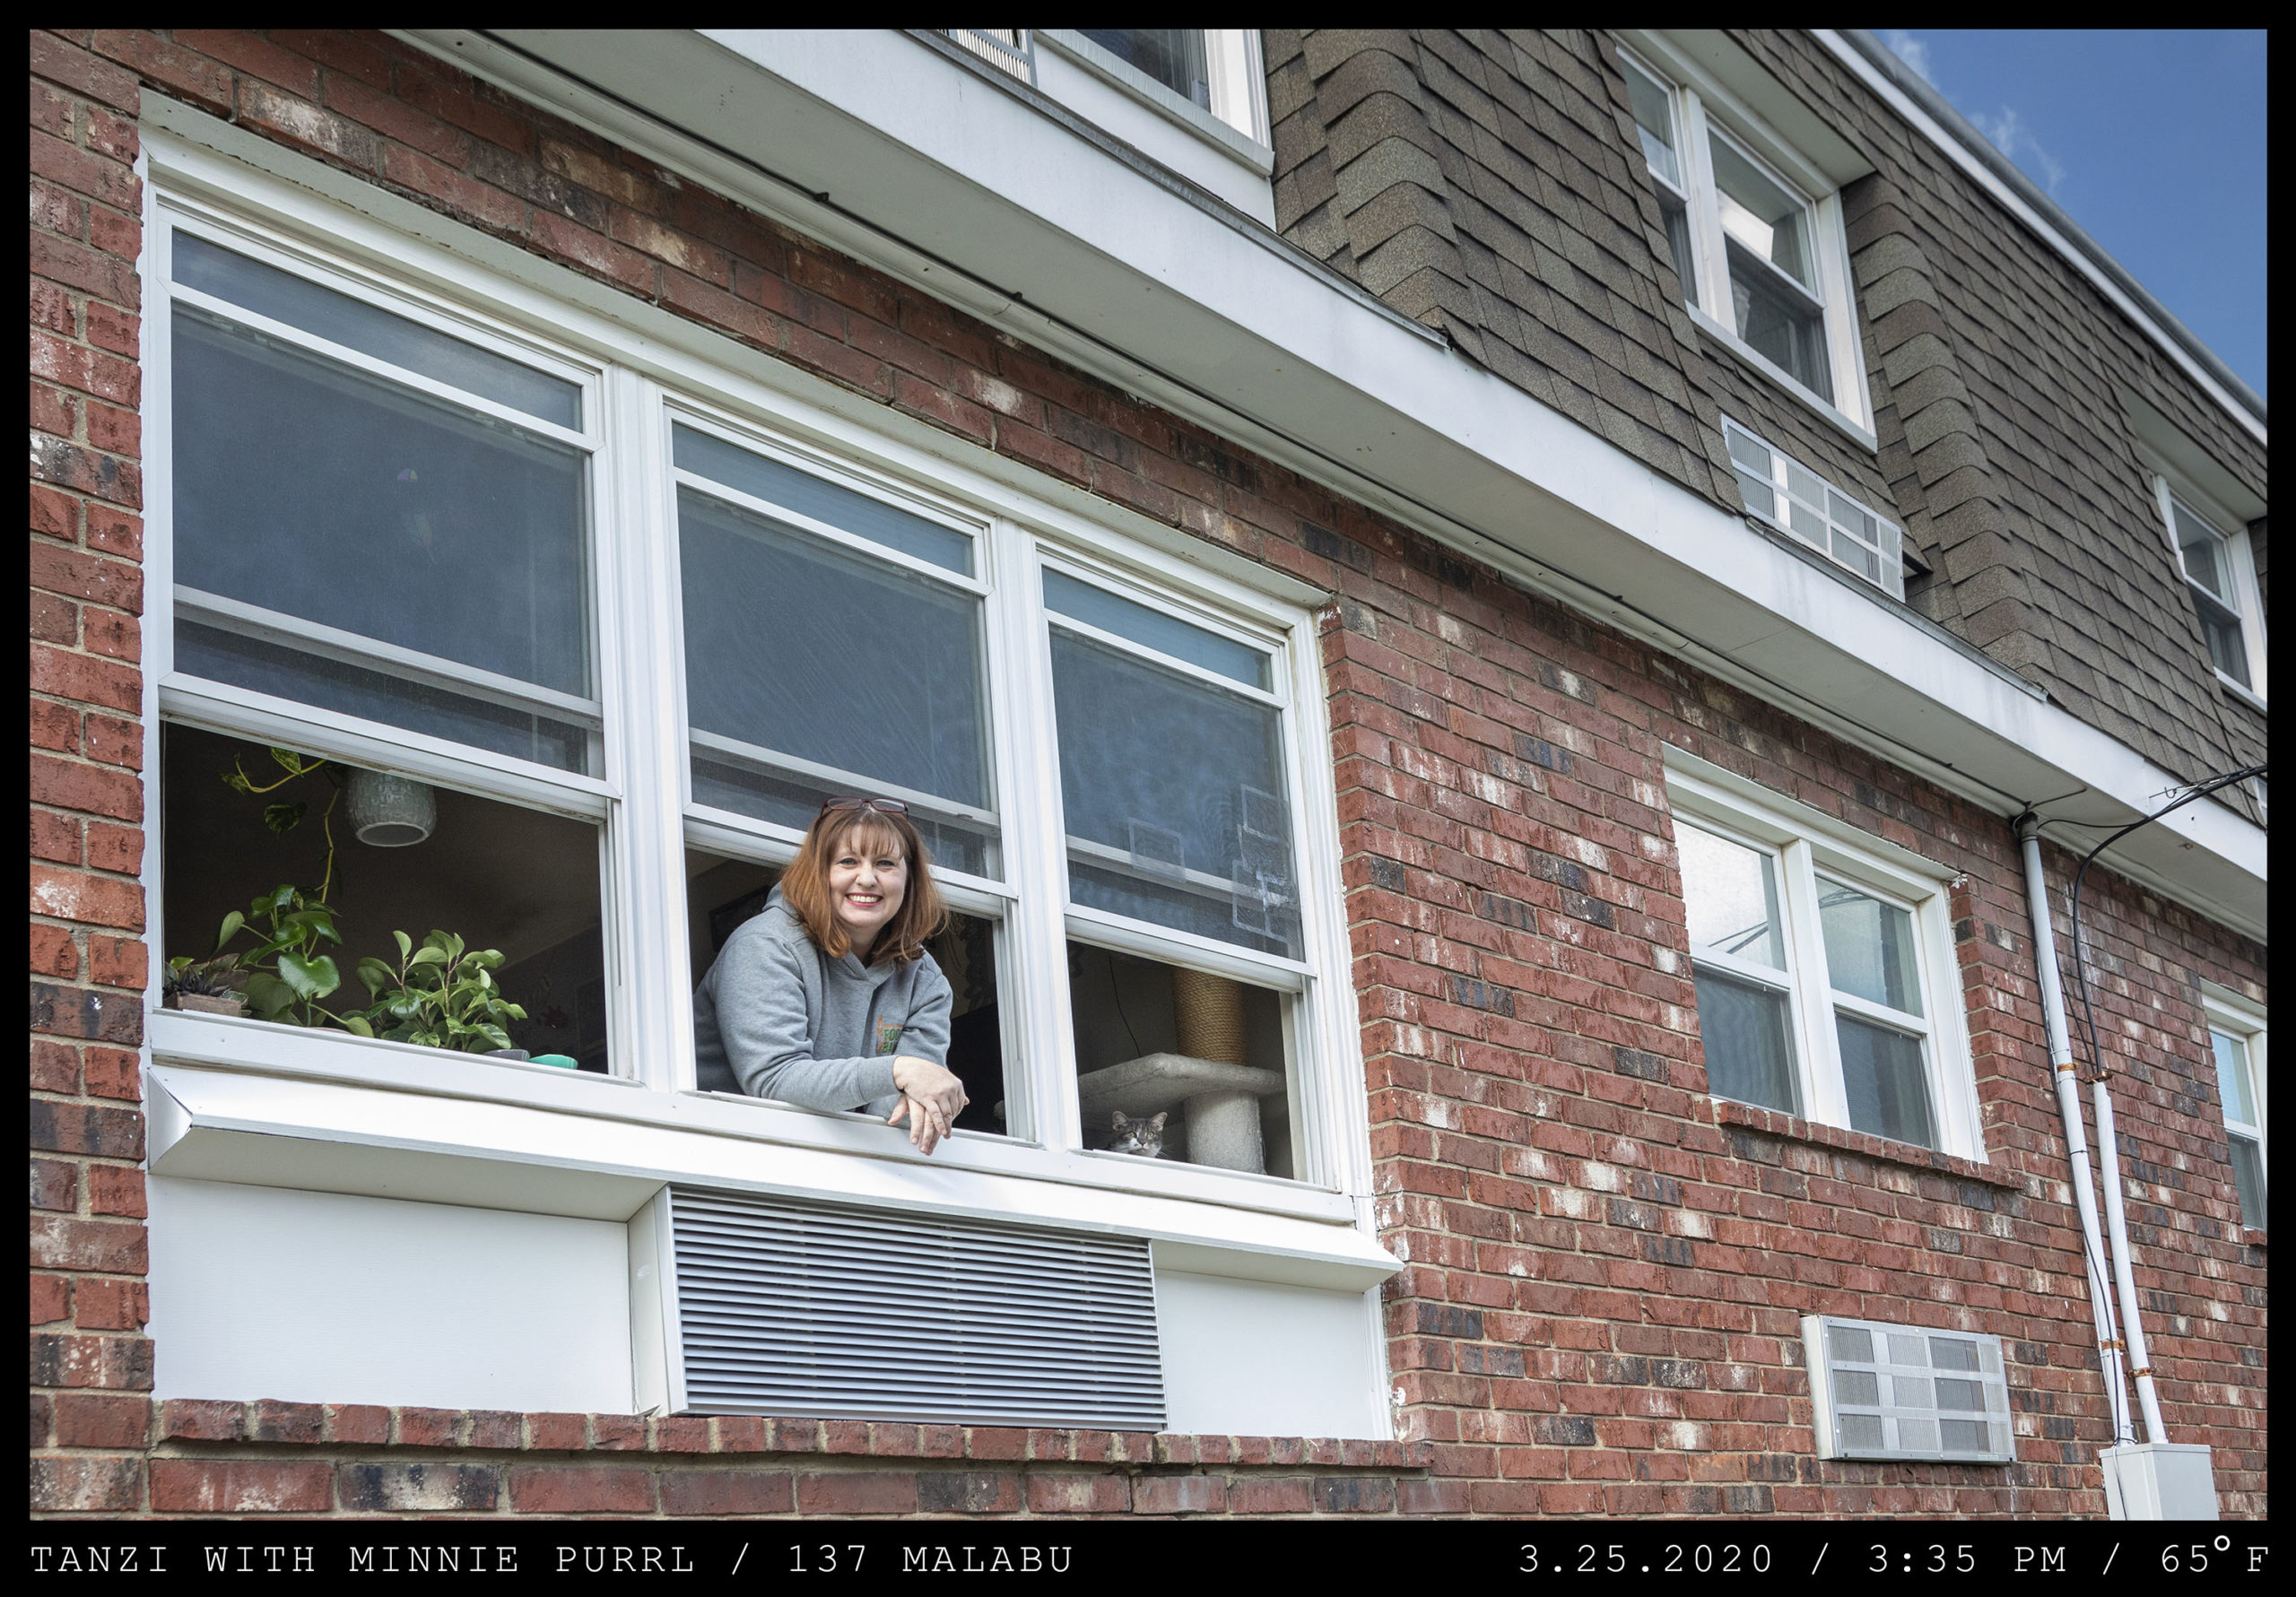 A woman leans from the window of a brick apartment, glsses seated atop her shoulder-length hair which a cat looks on from inside.